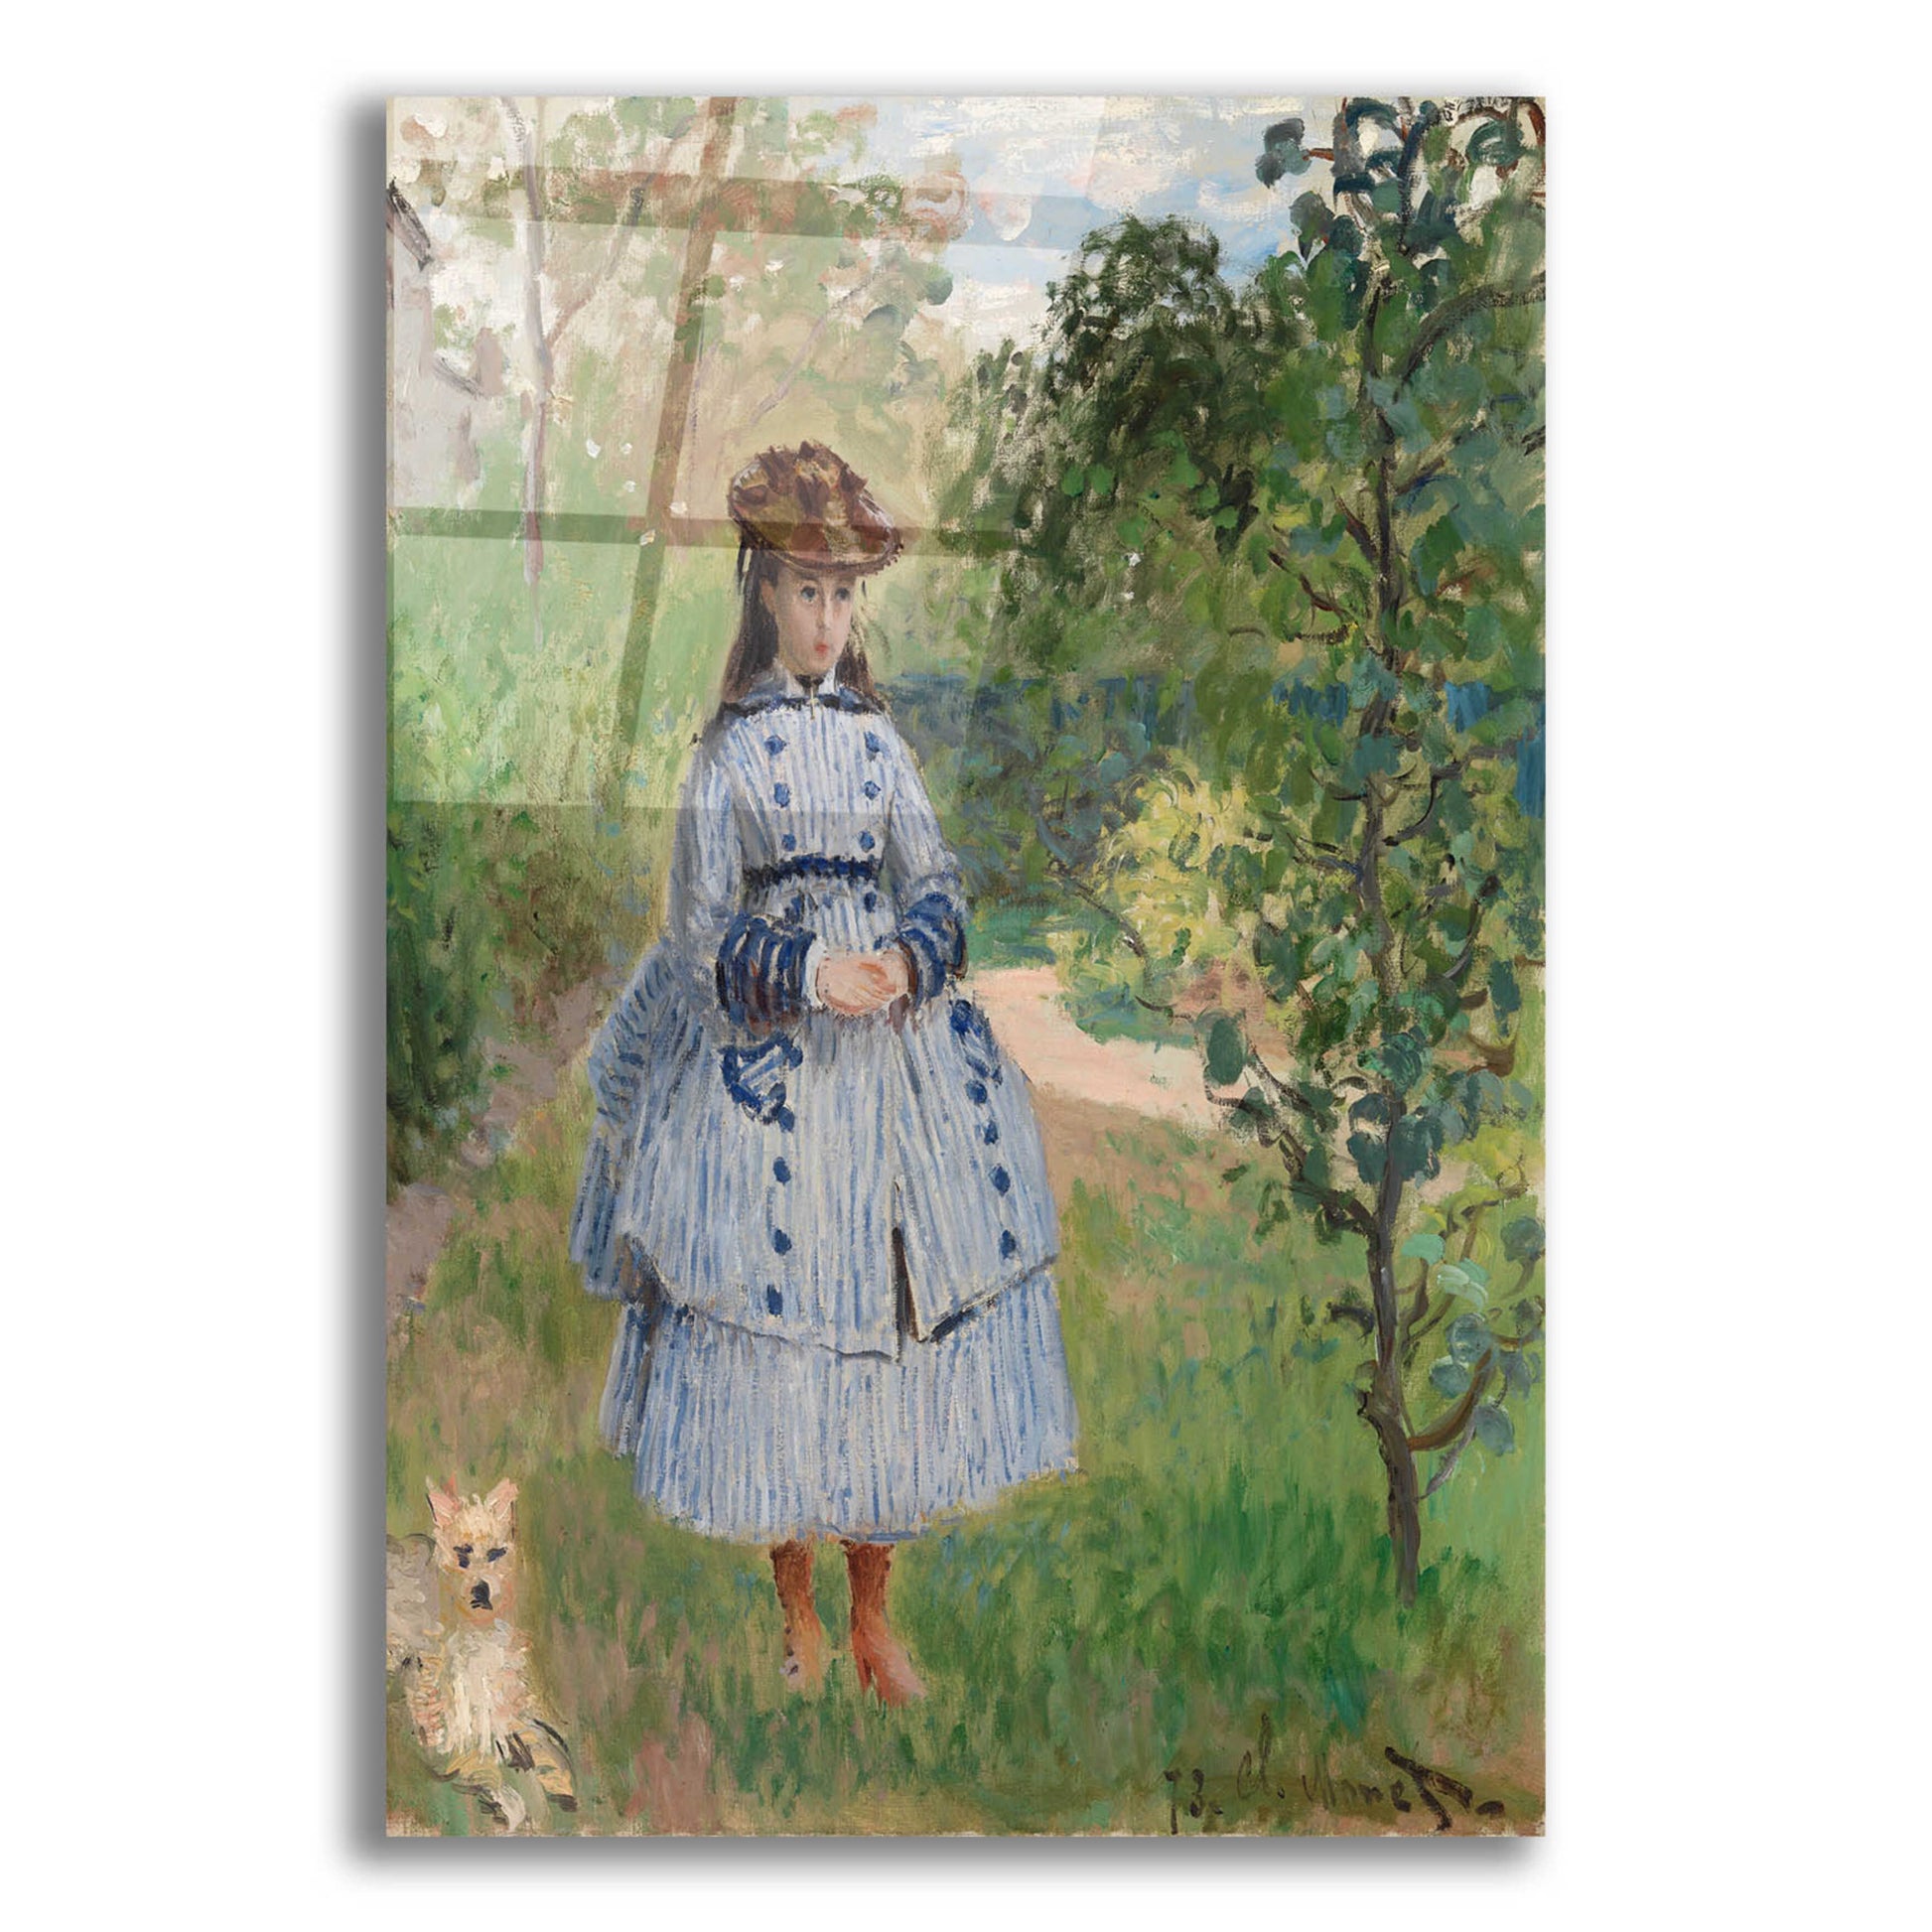 Epic Art 'Girl With Dog' by Claude Monet, Acrylic Glass Wall Art,12x16